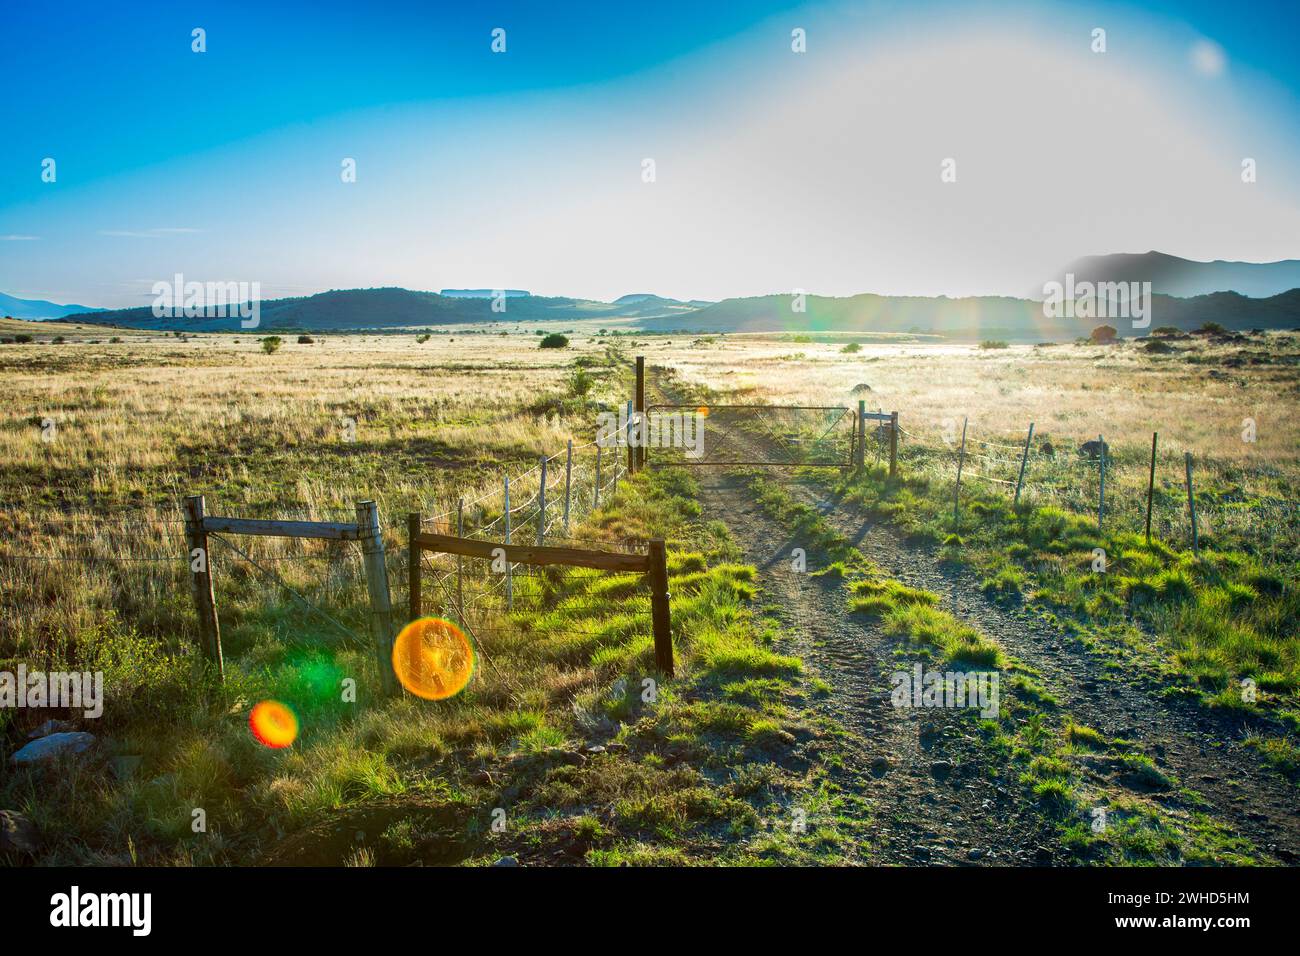 Africa, agriculture, daytime, Eastern Cape Province, farm, gate, landscape, nature, lens flare, no people, non-urban scene, outdoors, rays of sunshine, South Africa, tranquility, white background, scenic, Karoo Stock Photo